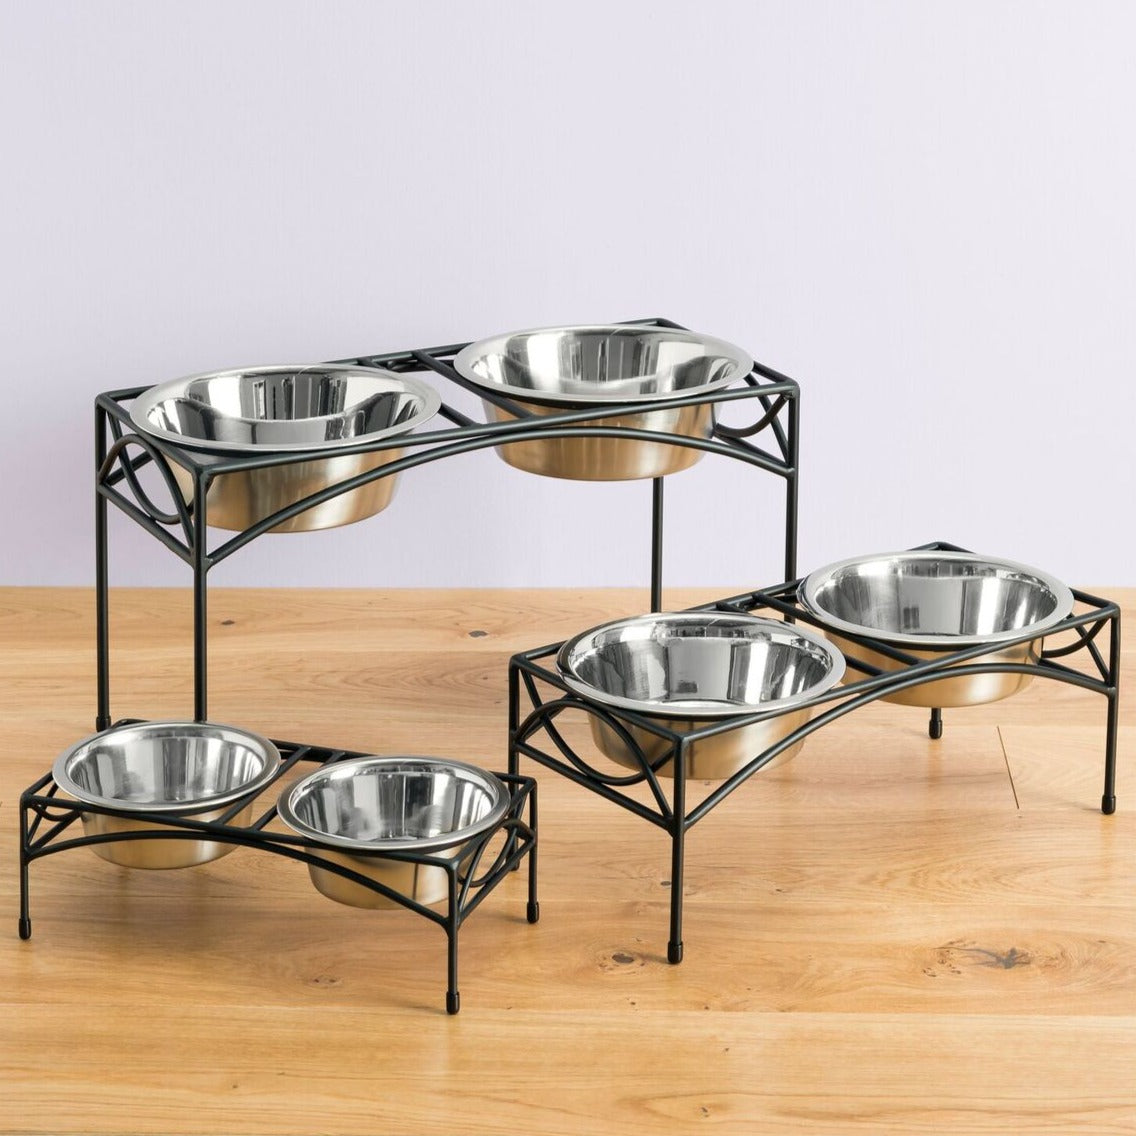 http://nmndesigns.com/cdn/shop/files/Regal-Double-Elevated-Dog-Bowl-Stand-Wrought-Iron-Metal-Stainless-Steel-Bowls-Small-Medium-Large-RDB9-RegalDoubleDiner-Set-2018.jpg?v=1704013883